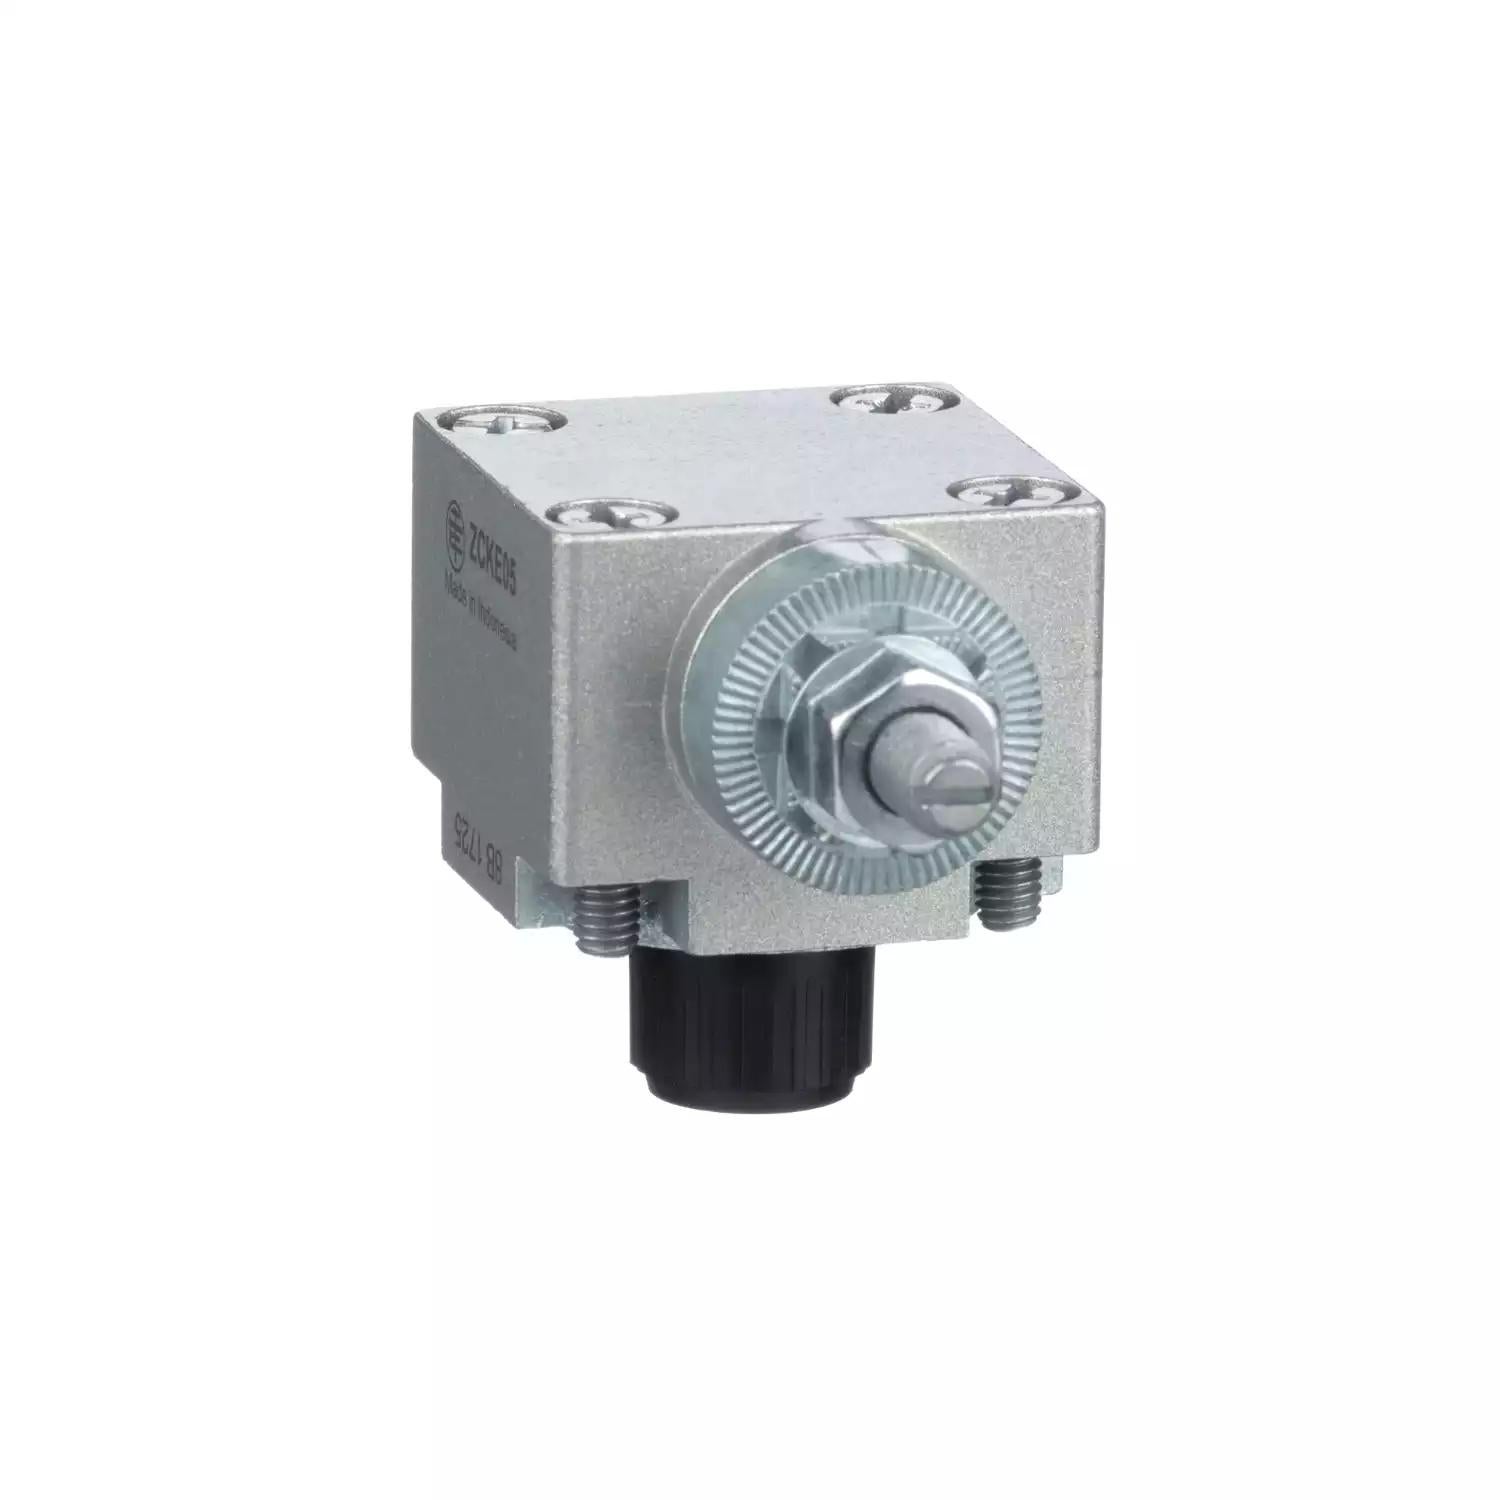 Limit switch head, Limit switches XC Standard, ZCKE, without lever left and right actuation